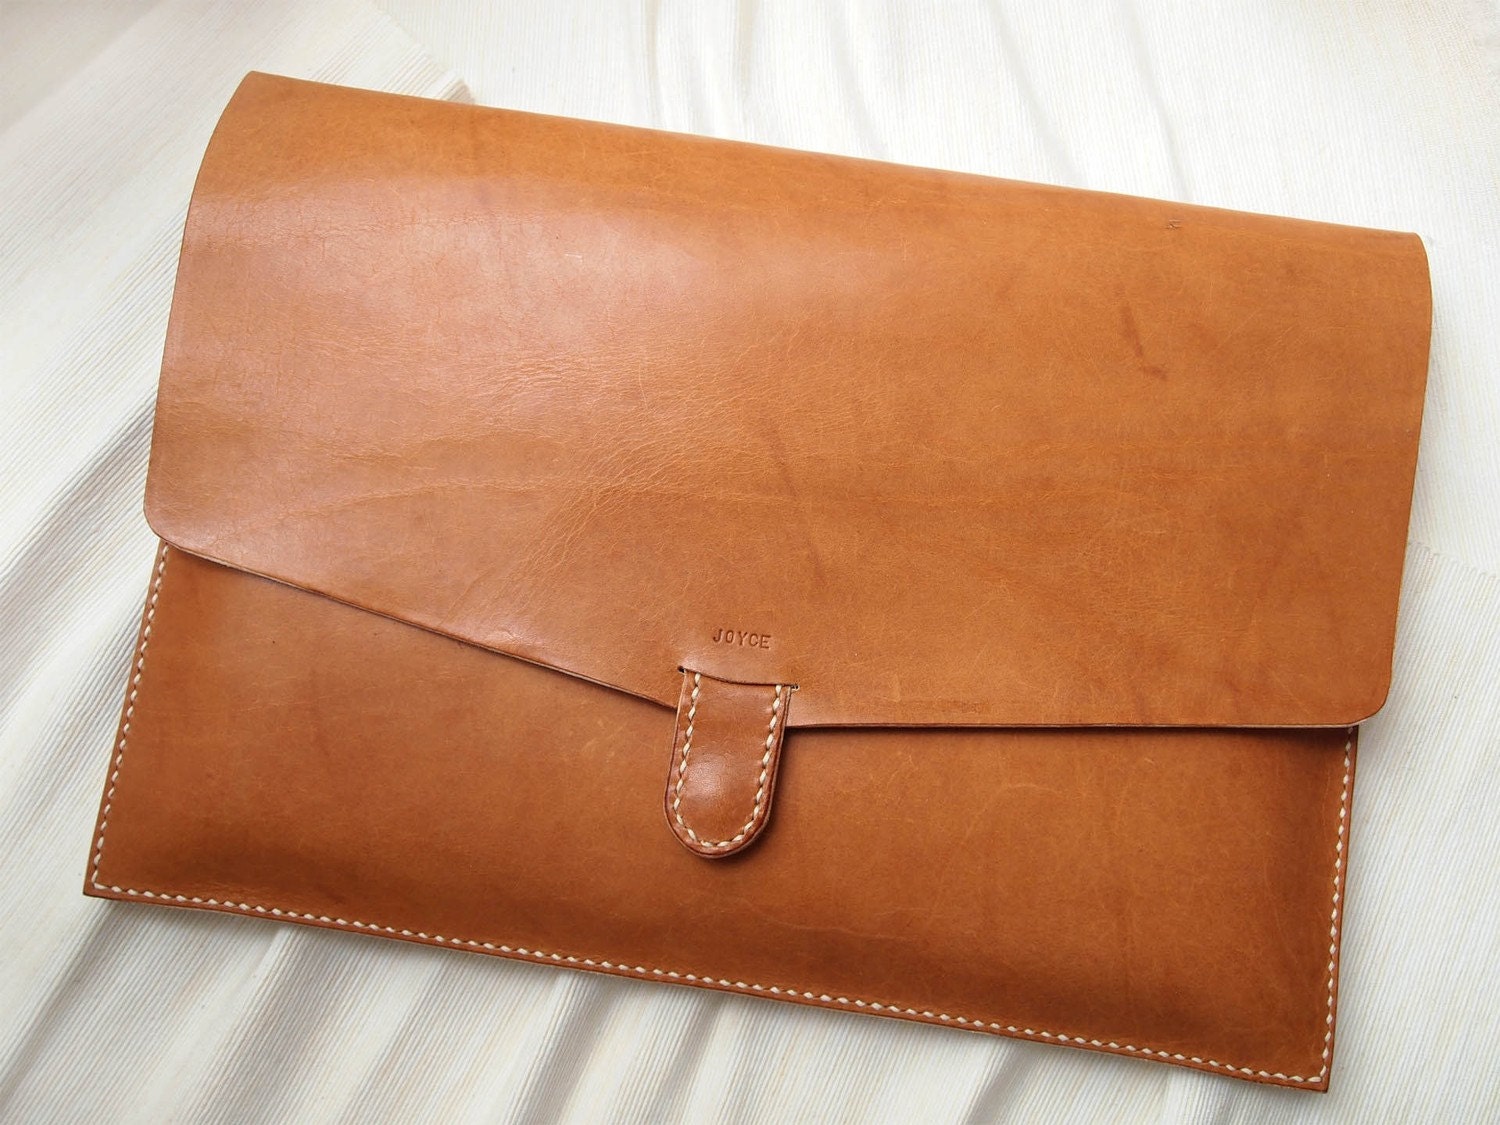 Personalized 13 Macbook Pro / Macbook Air Case - Leather - Hand Stitched